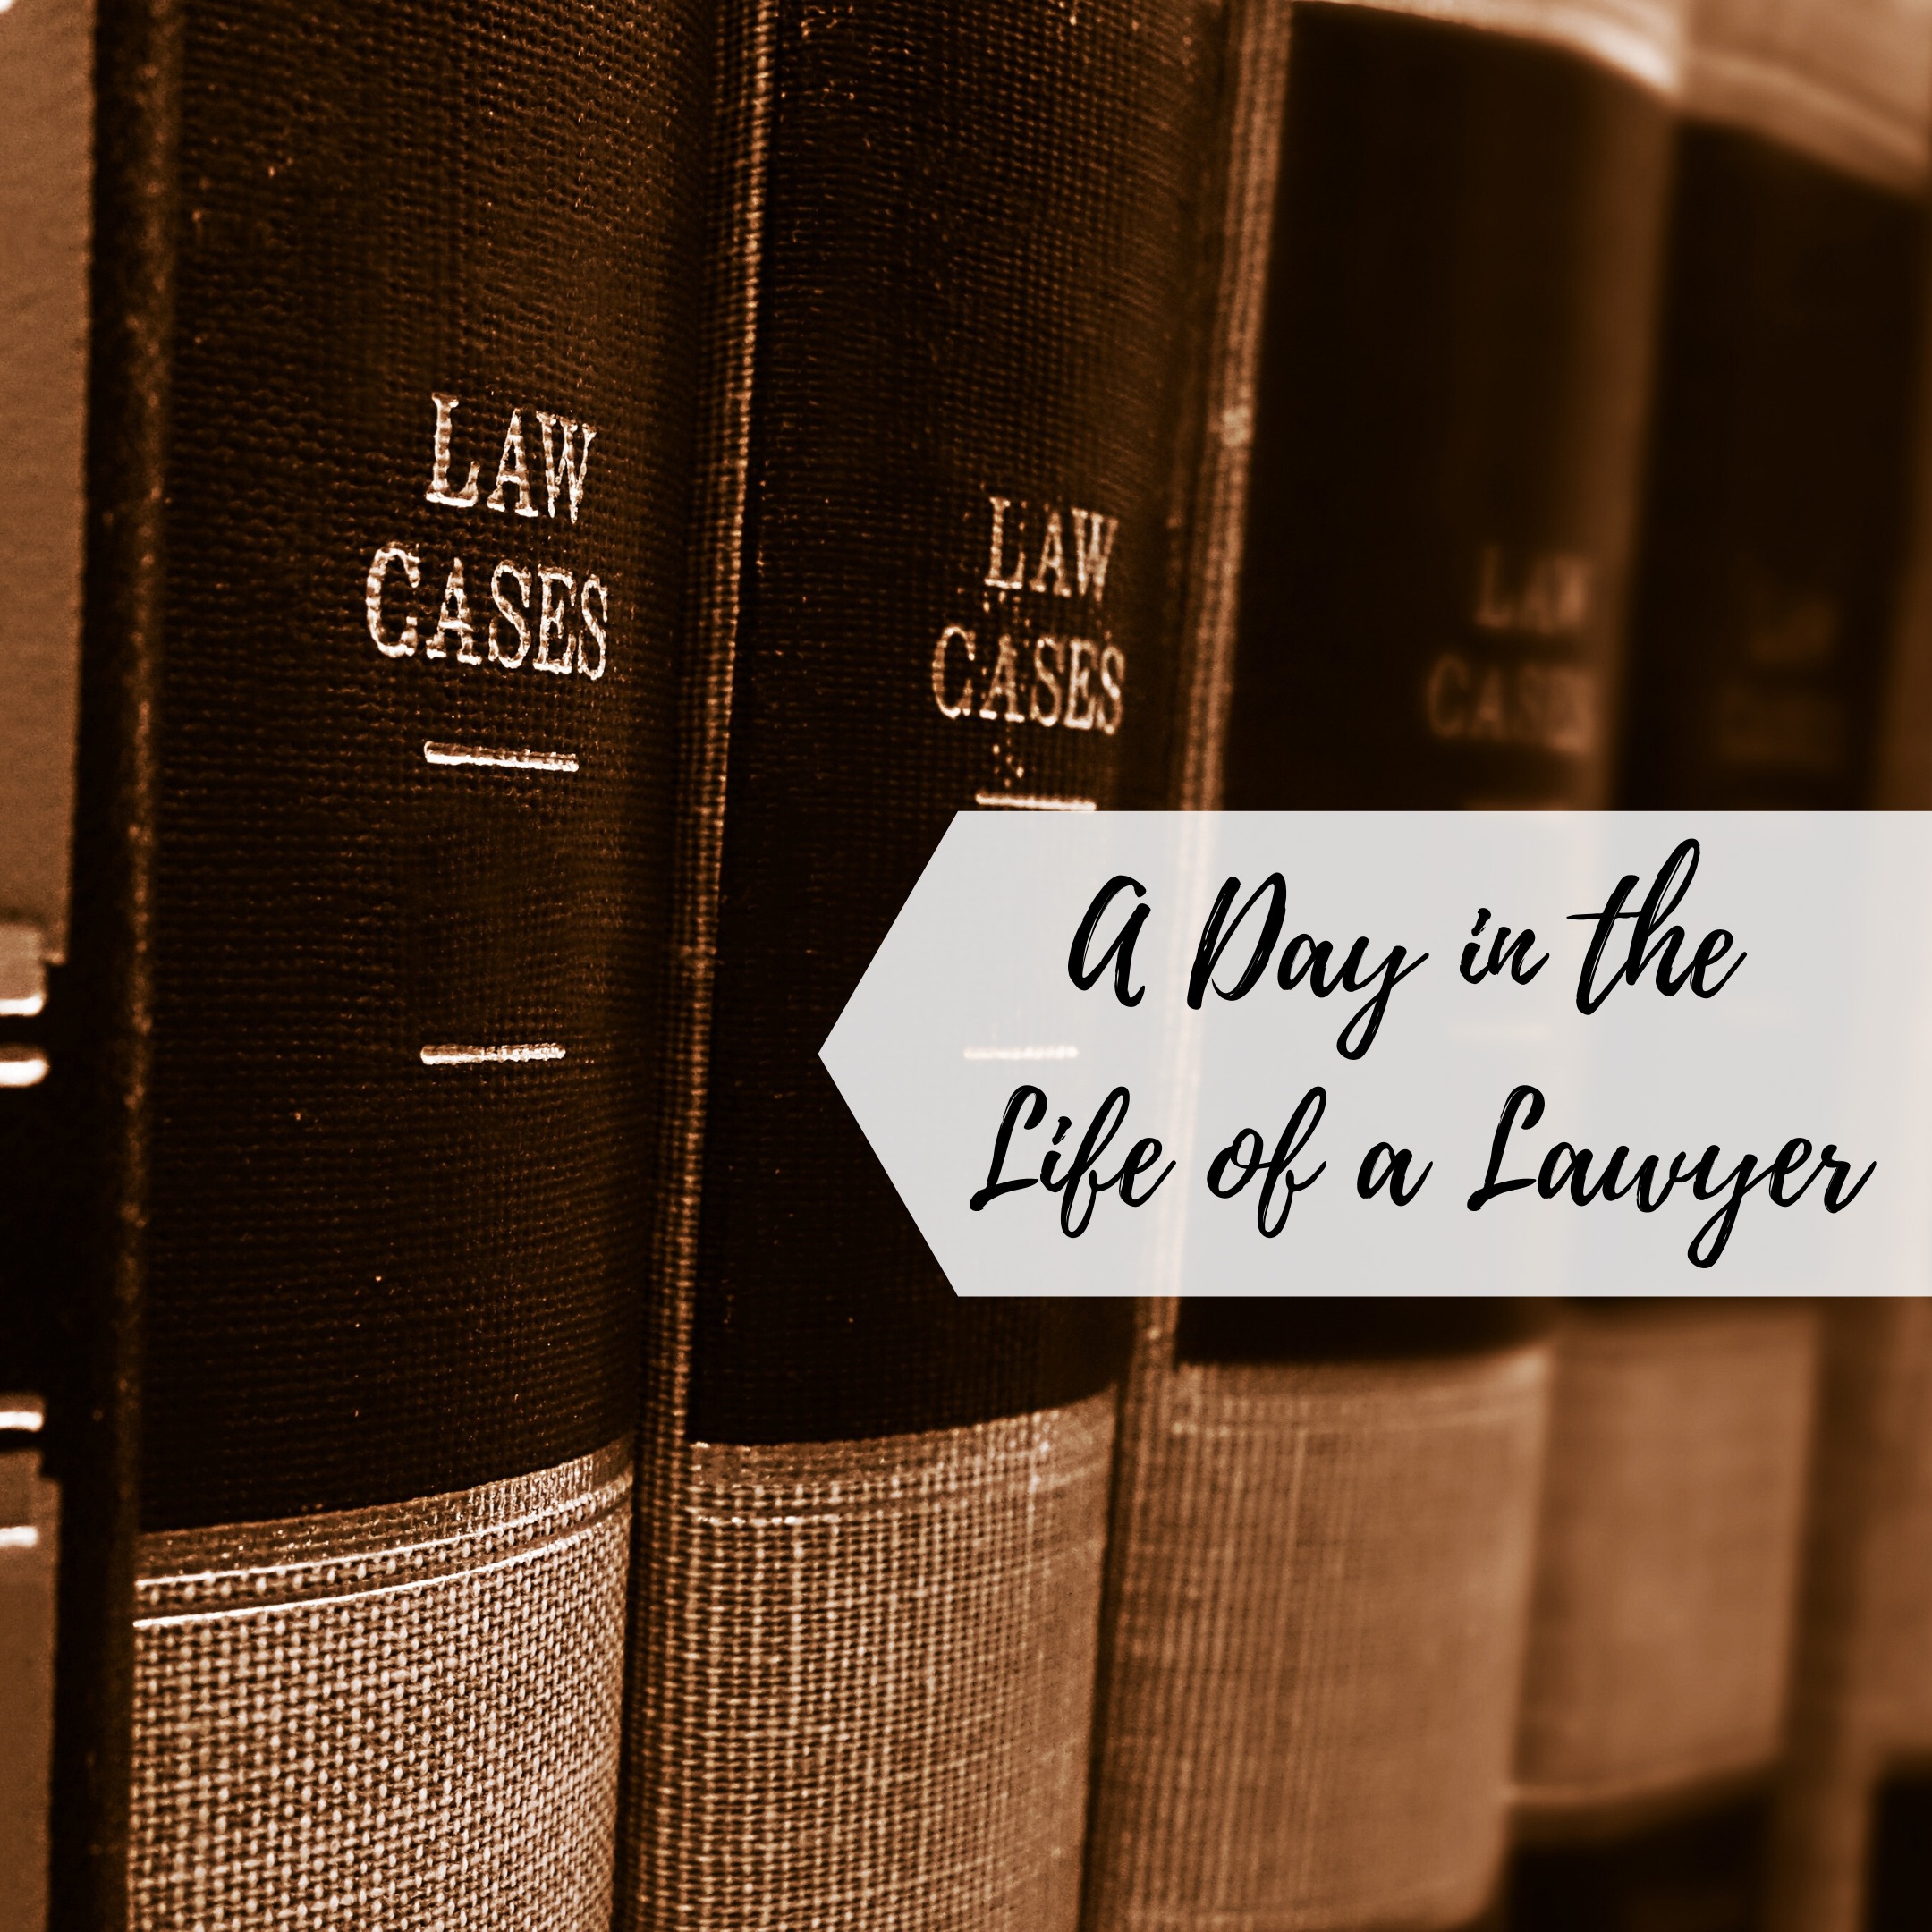 A Day in the Life of a Lawyer